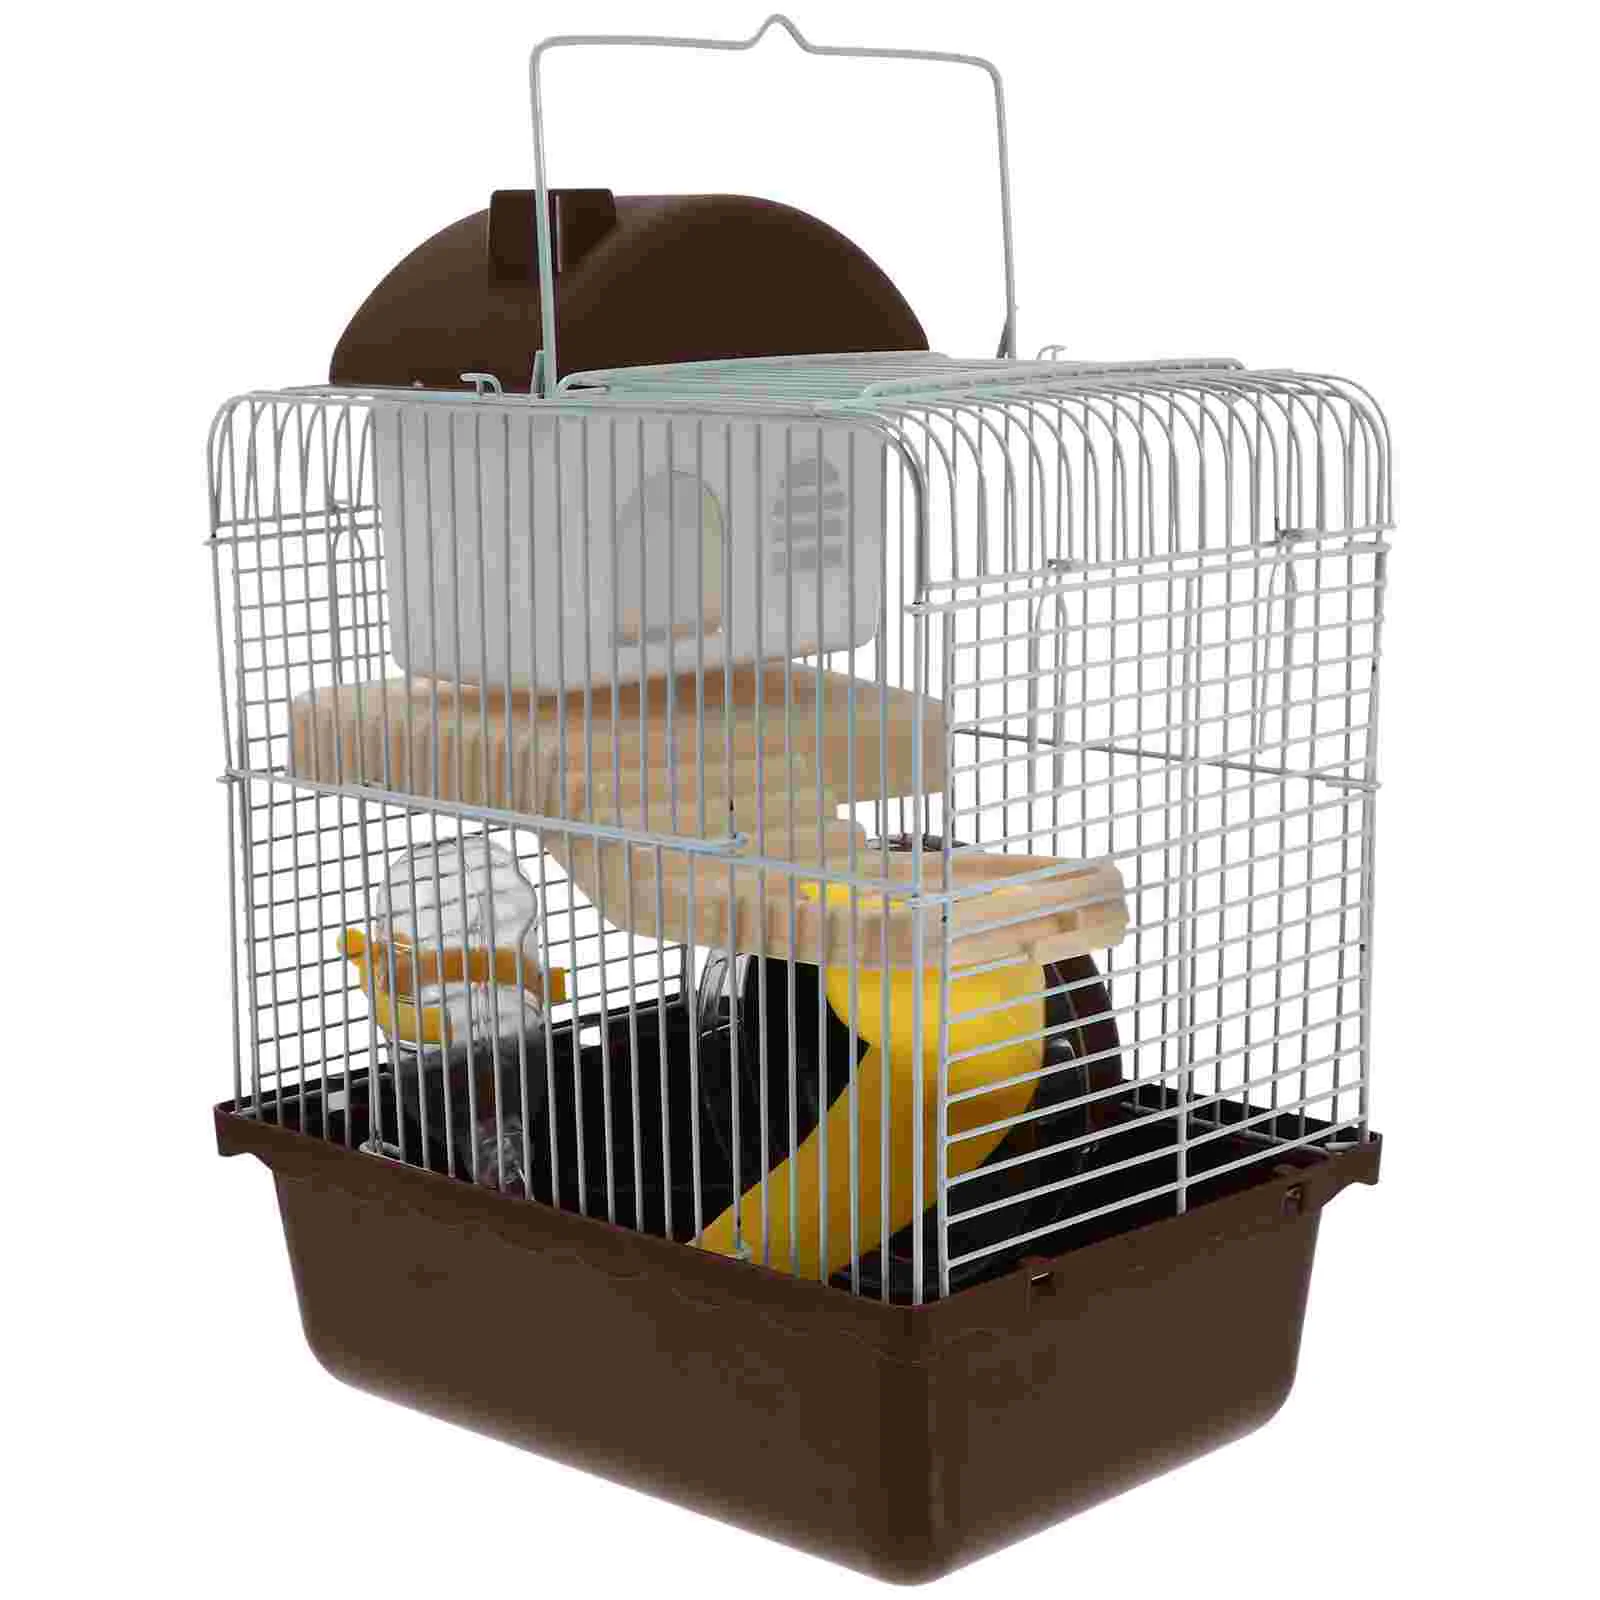 

Hamster Cage Portable Fencing House Toy Hedgehog Pet Hut Small Plastic Mouse Travel Hideout For